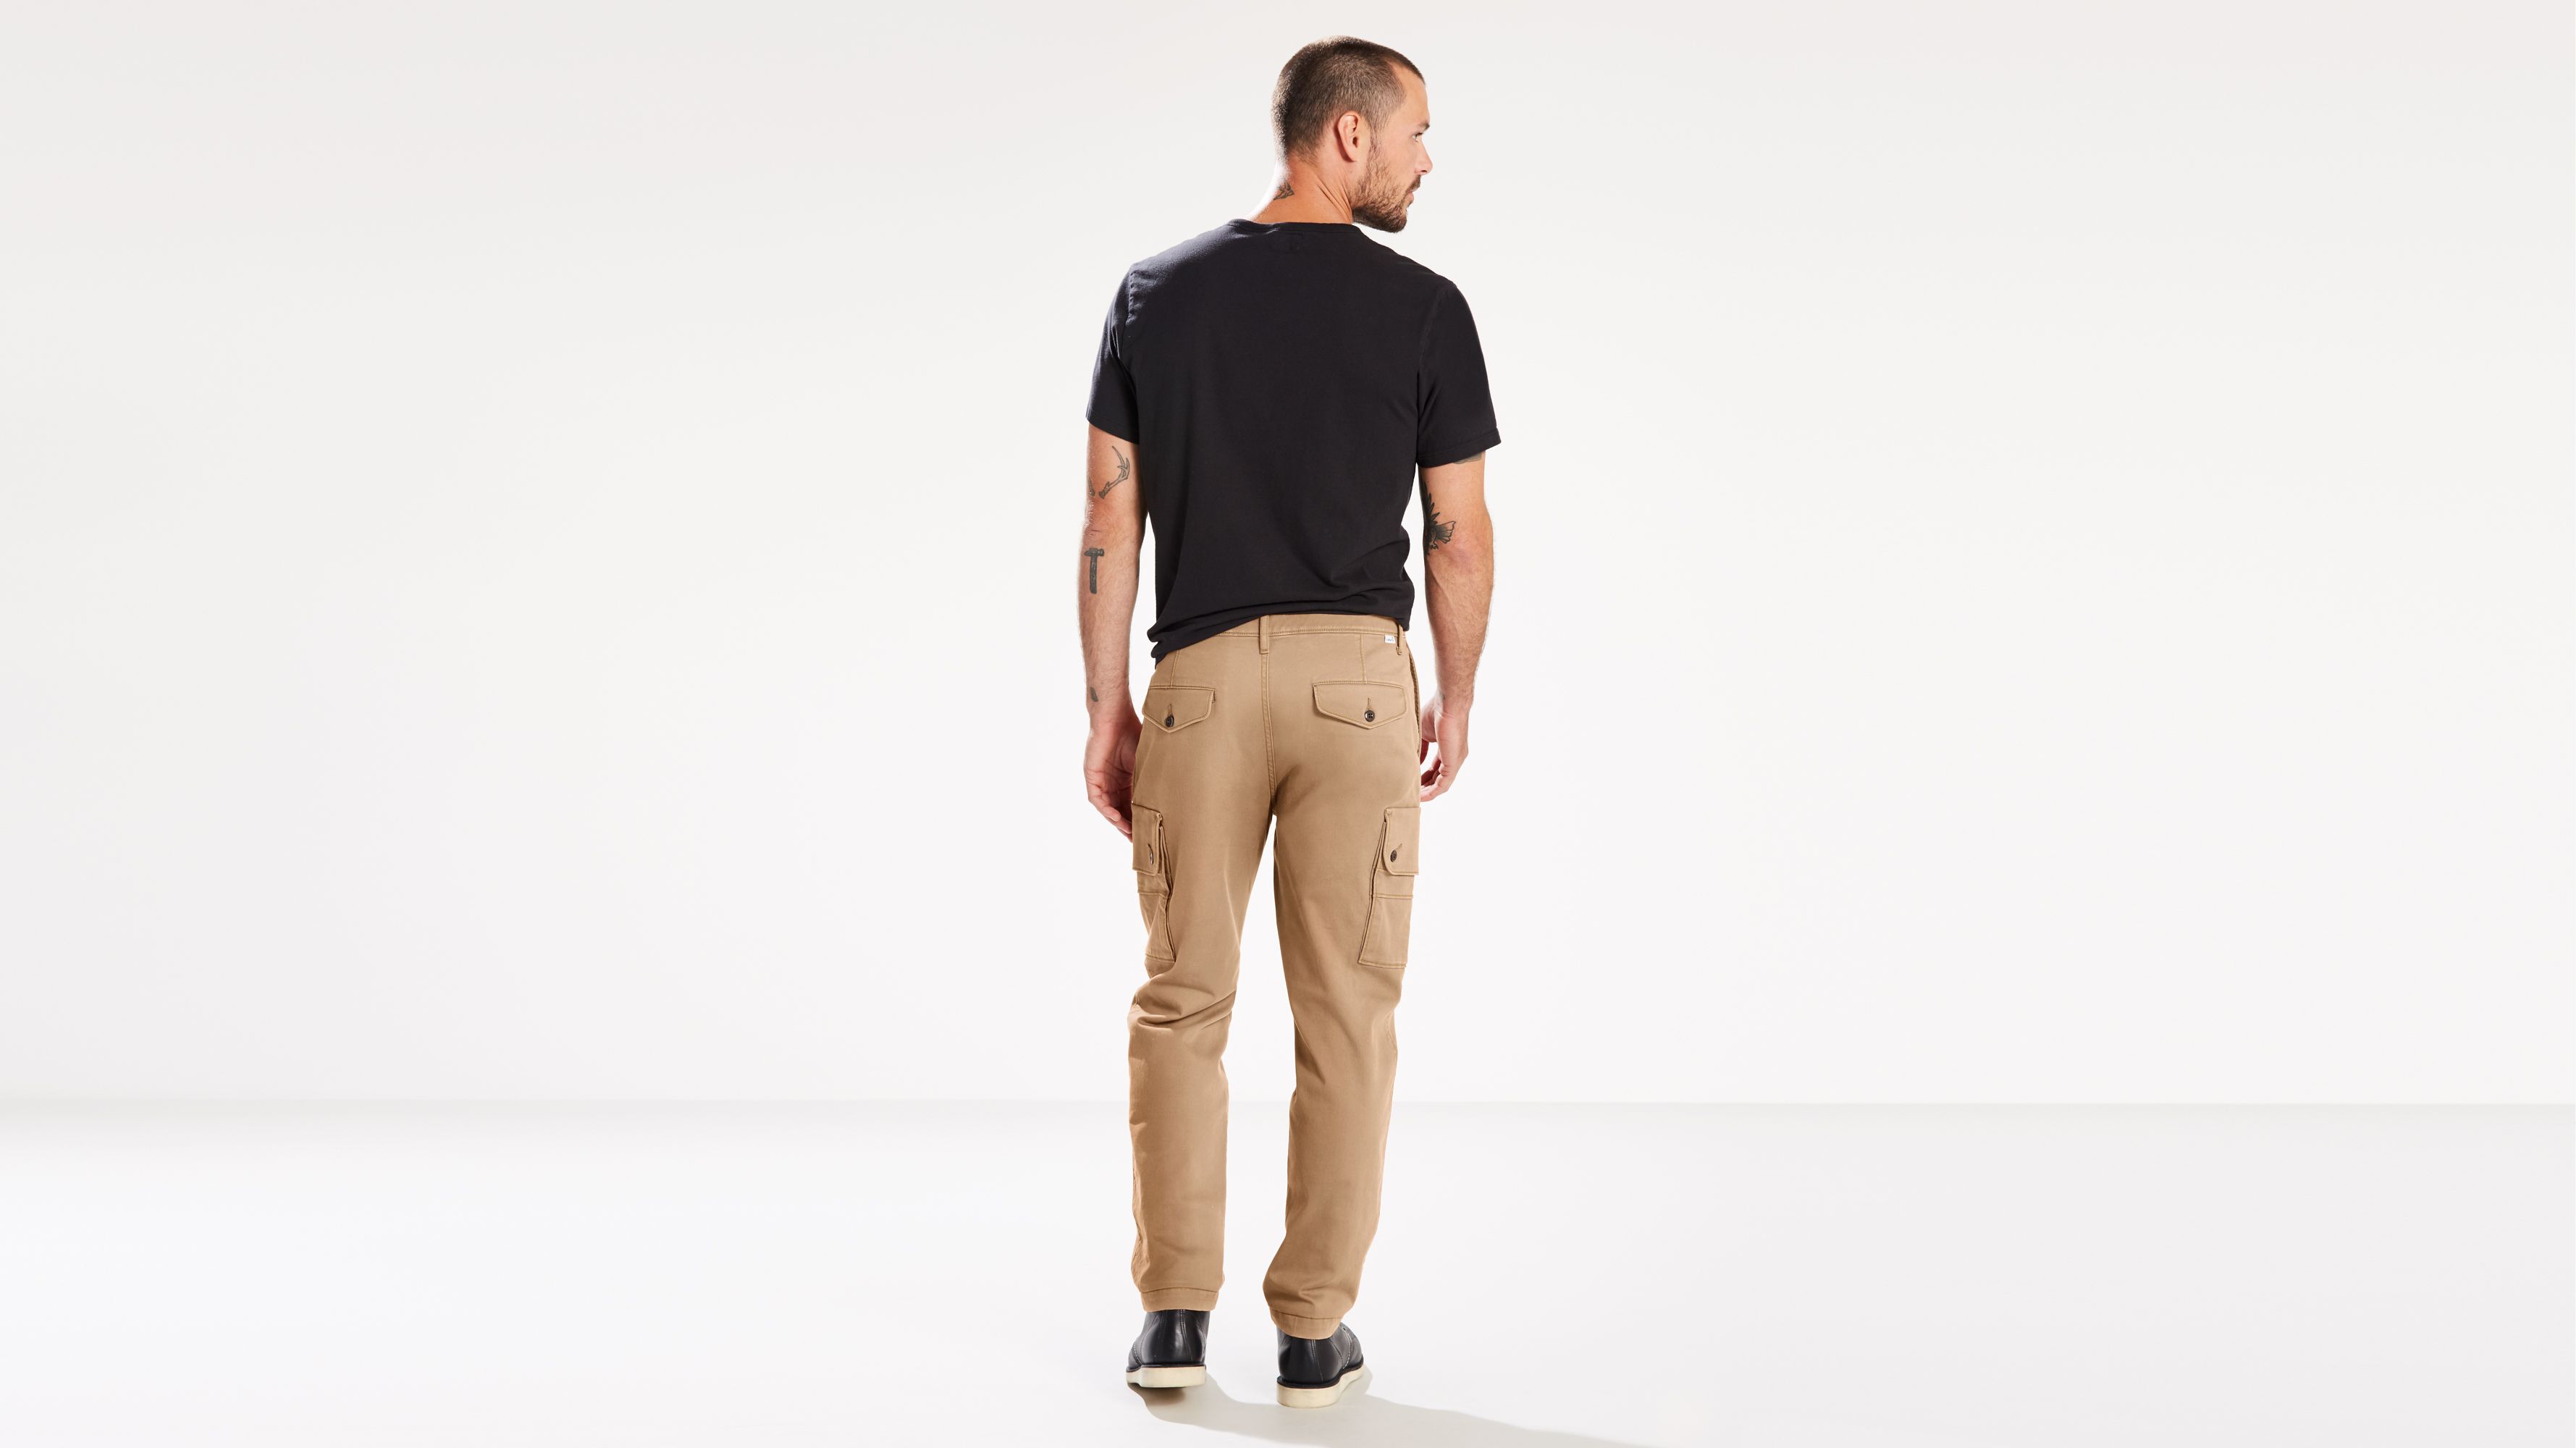 Levi's® Men's Stay Loose Cargo Pants - Pirate Black Twill | Levi's SG